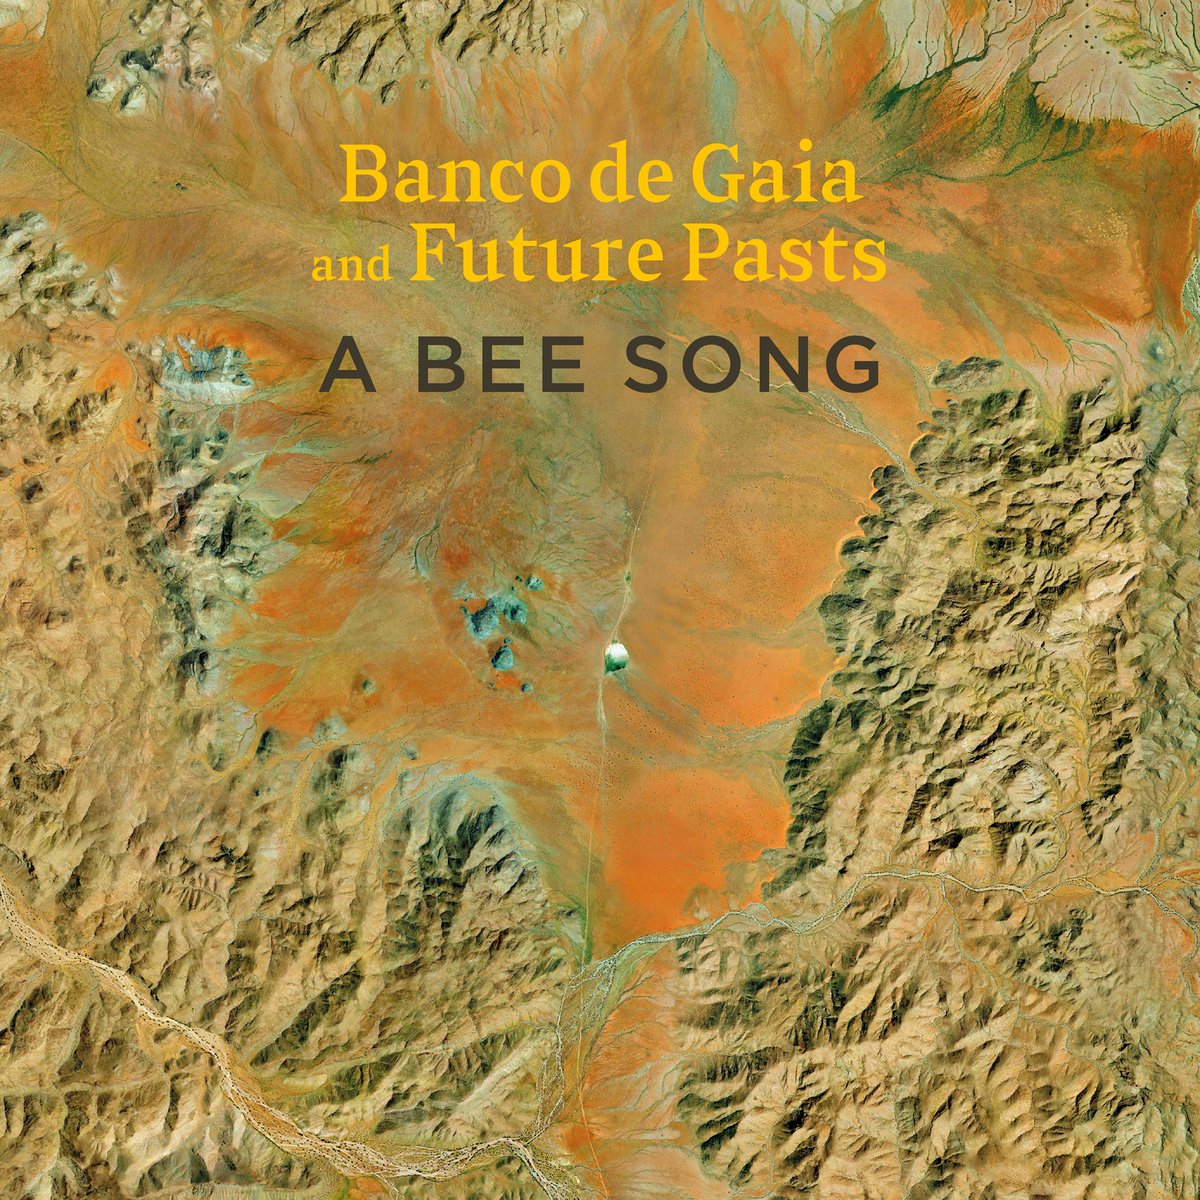 Excited to announce the release of my collaboration with Future Pasts, A Bee Song, a re-composition based on a 1954 recording of a Damara praise song held by Basler Afrika Bibliographien: Spotify spoti.fi/3w94Uns Apple apple.co/3w94VI2 Amazon amzn.to/4b9BzrW